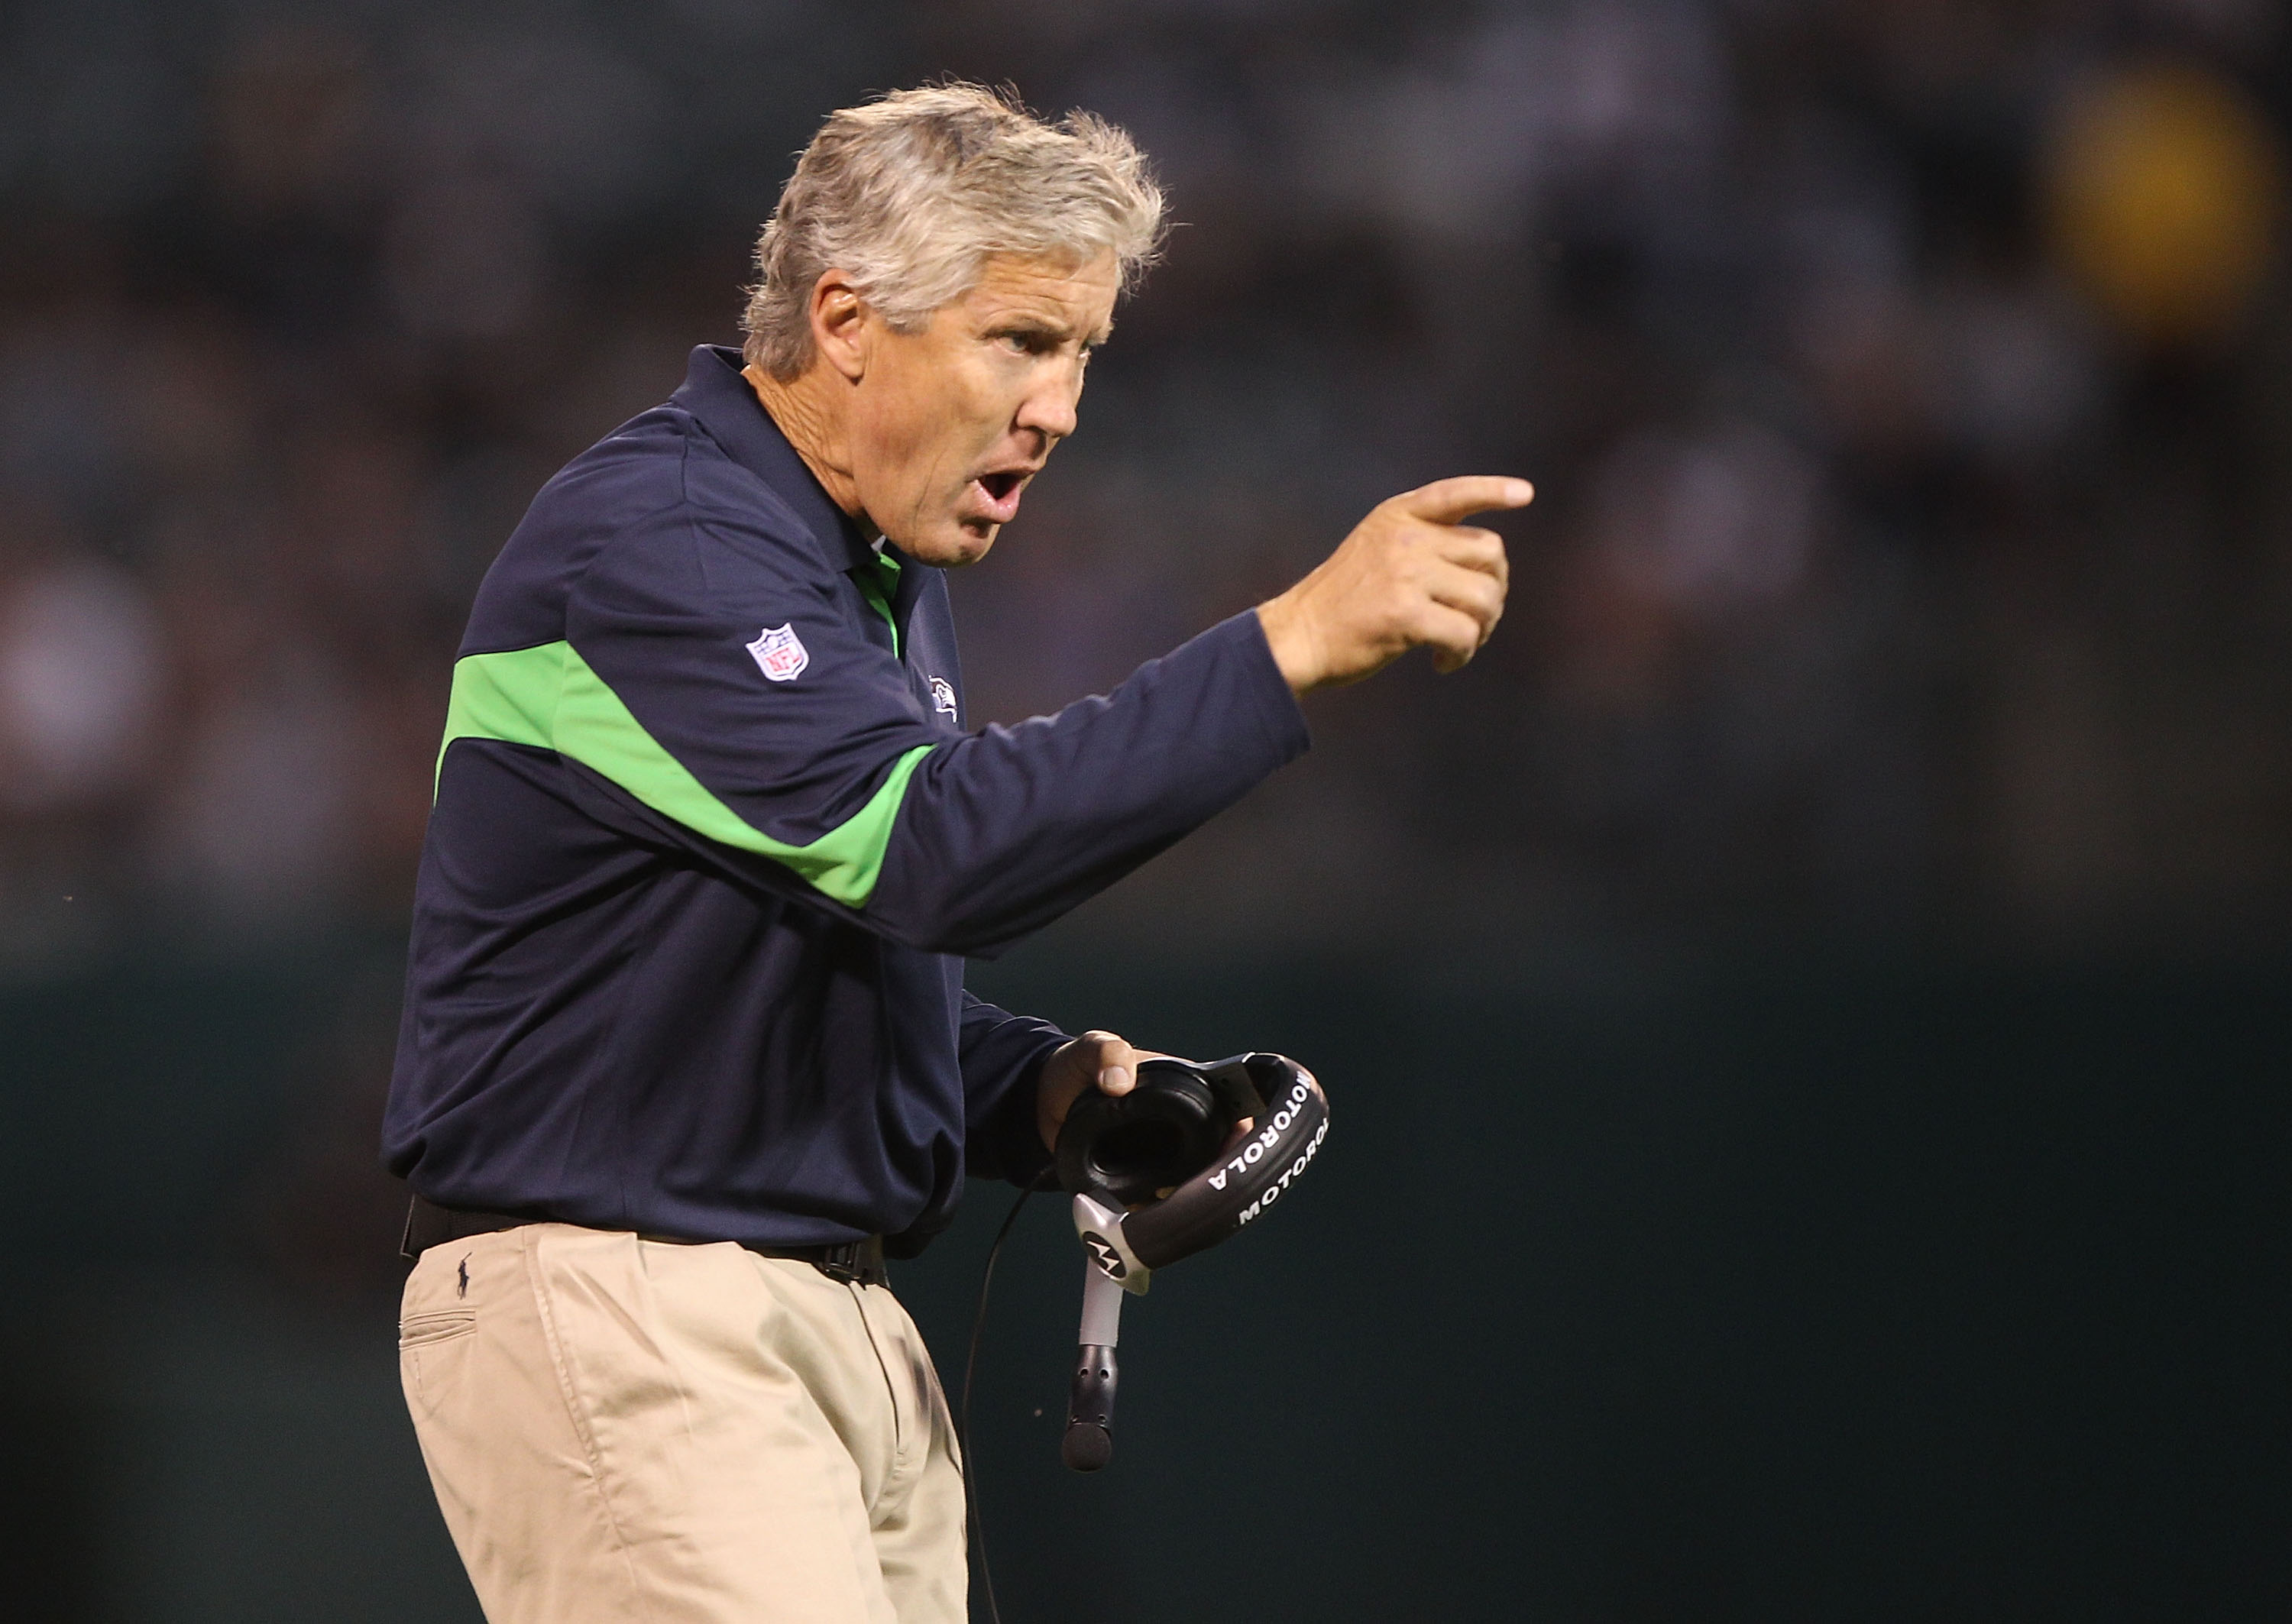 OAKLAND, CA - SEPTEMBER 02:  Head coach Pete Carroll of the Seattle Seahawks looks on against the Oakland Raiders during an NFL preseason game at Oakland-Alameda County Coliseum on September 2, 2010 in Oakland, California.  (Photo by Jed Jacobsohn/Getty I